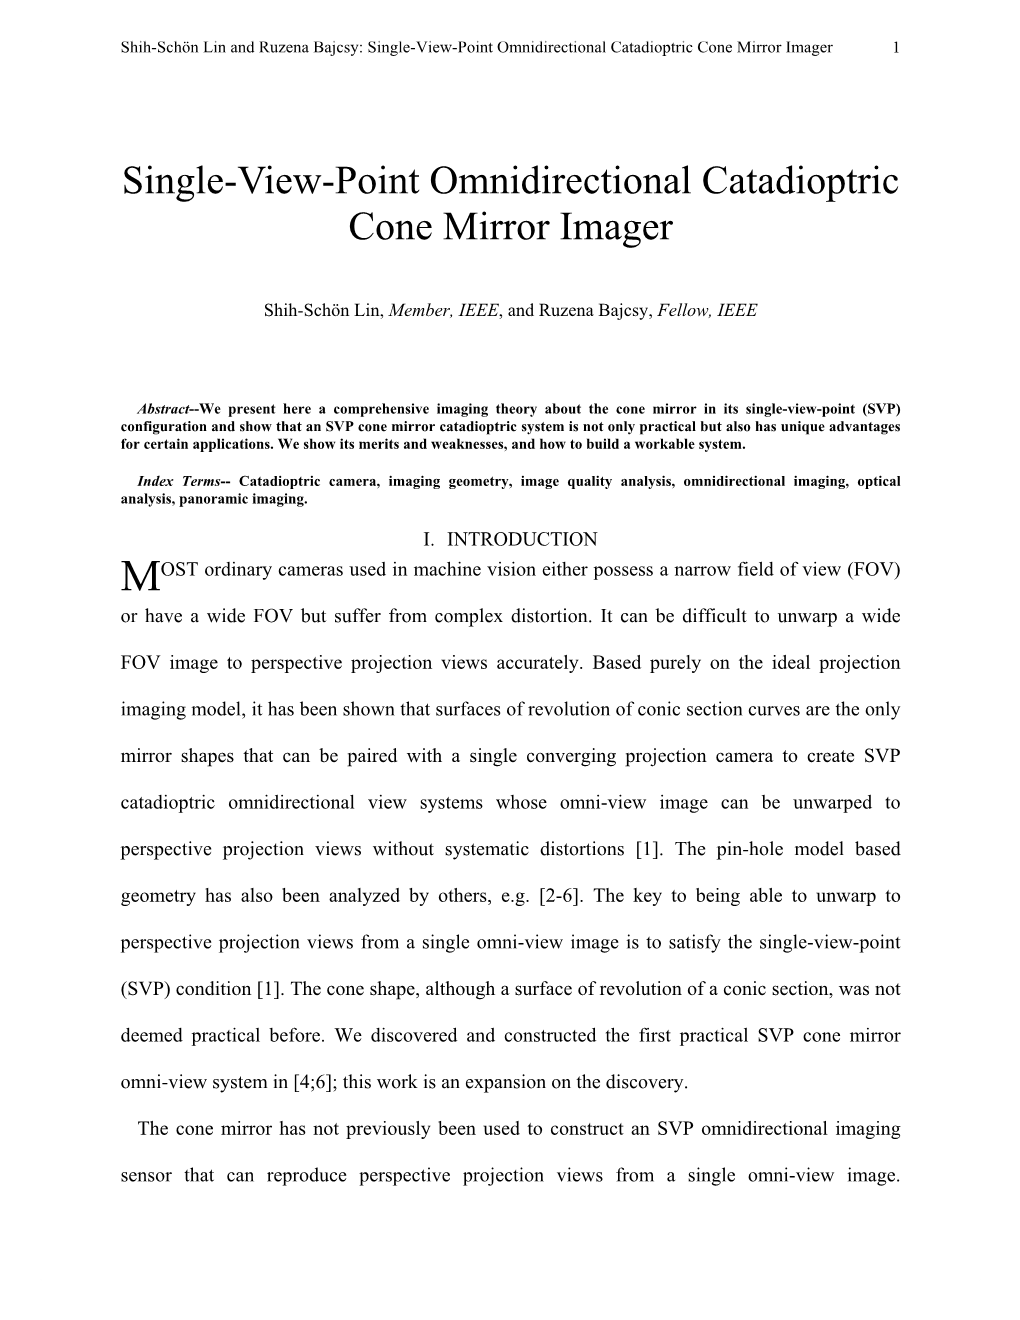 Single-View-Point Omnidirectional Catadioptric Cone Mirror Imager 1